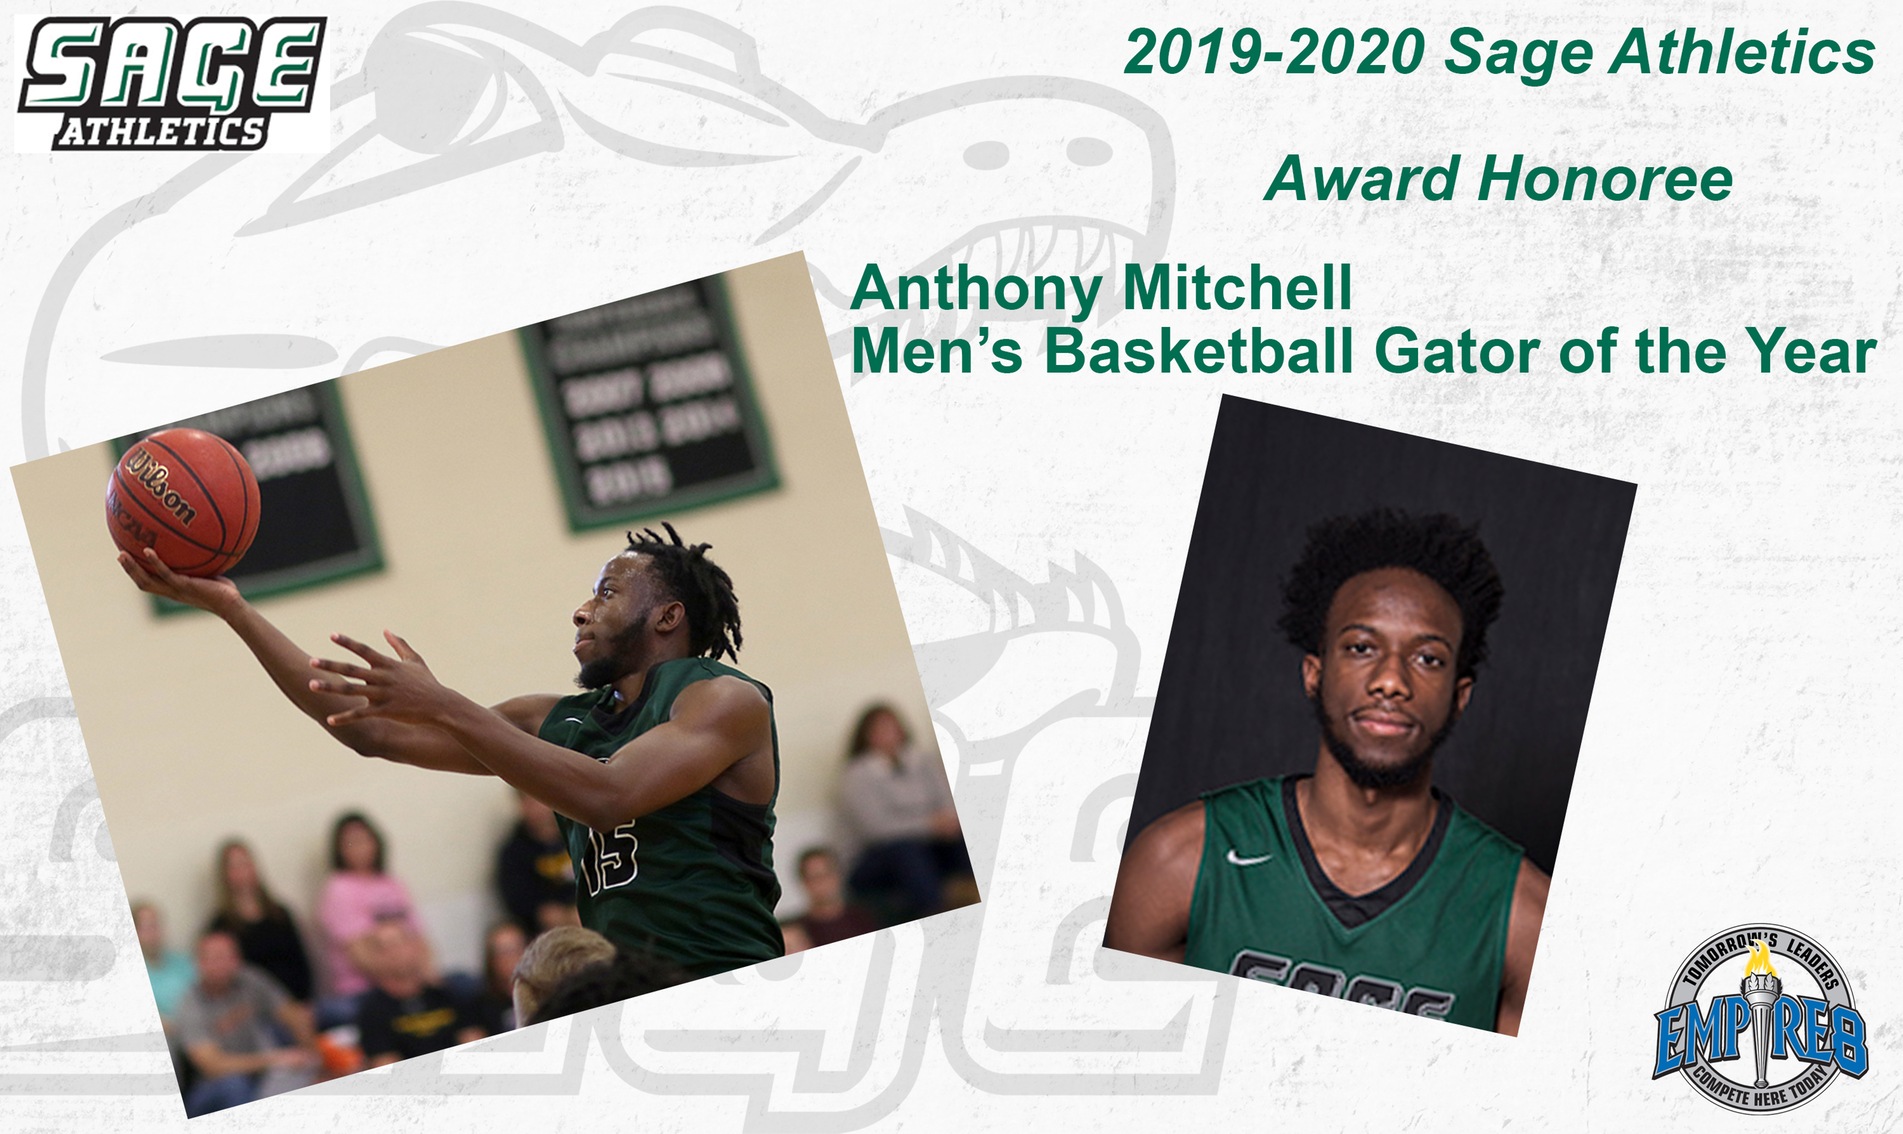 Men's Basketball Gator of the Year Award given to Anthony Mitchell